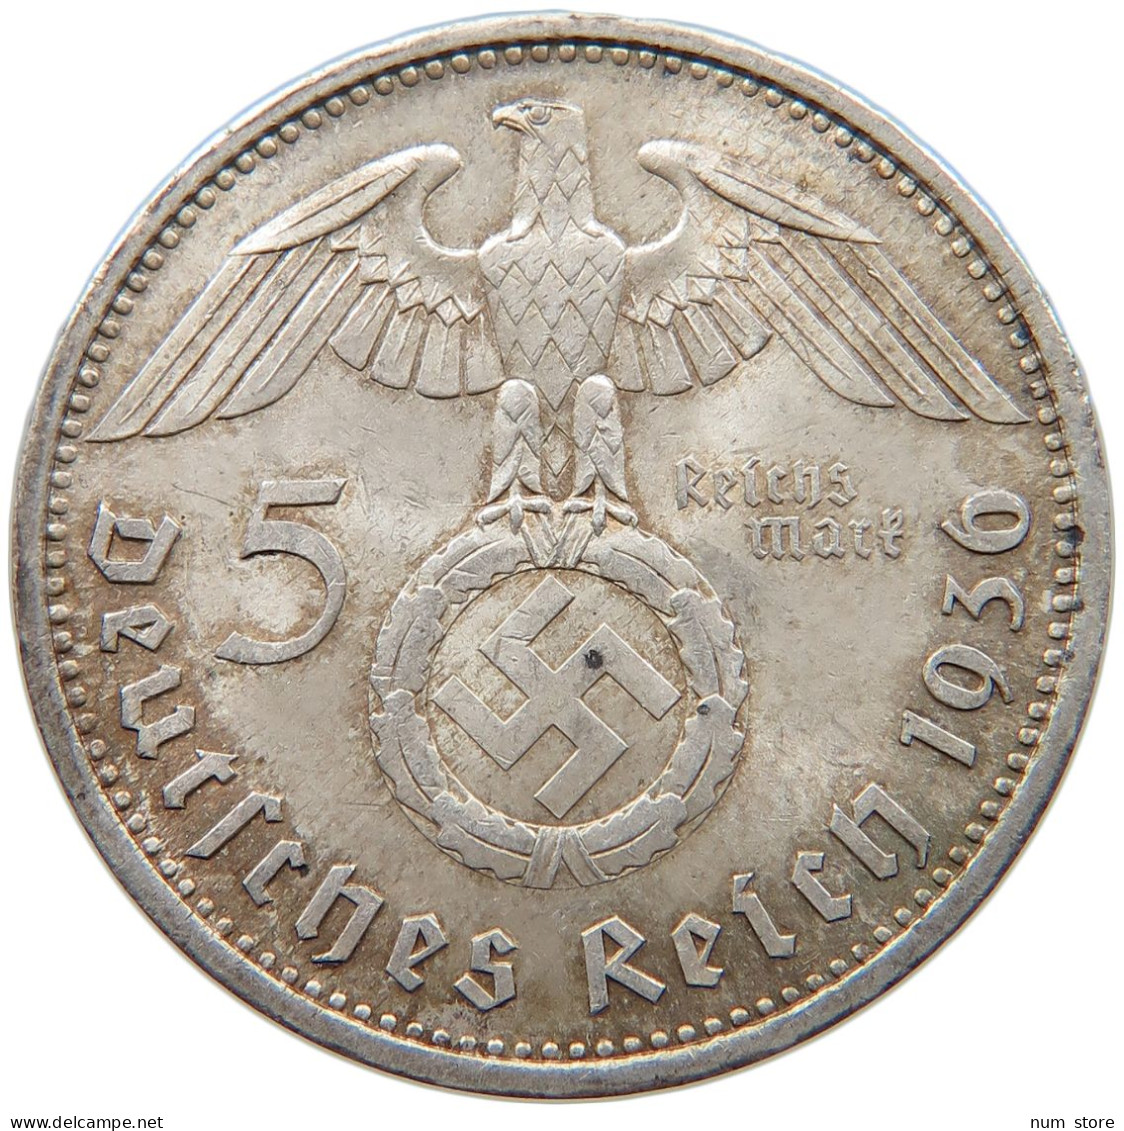 GERMANY 5 MARK 1936 A #s094 0069 - 5 Reichsmark